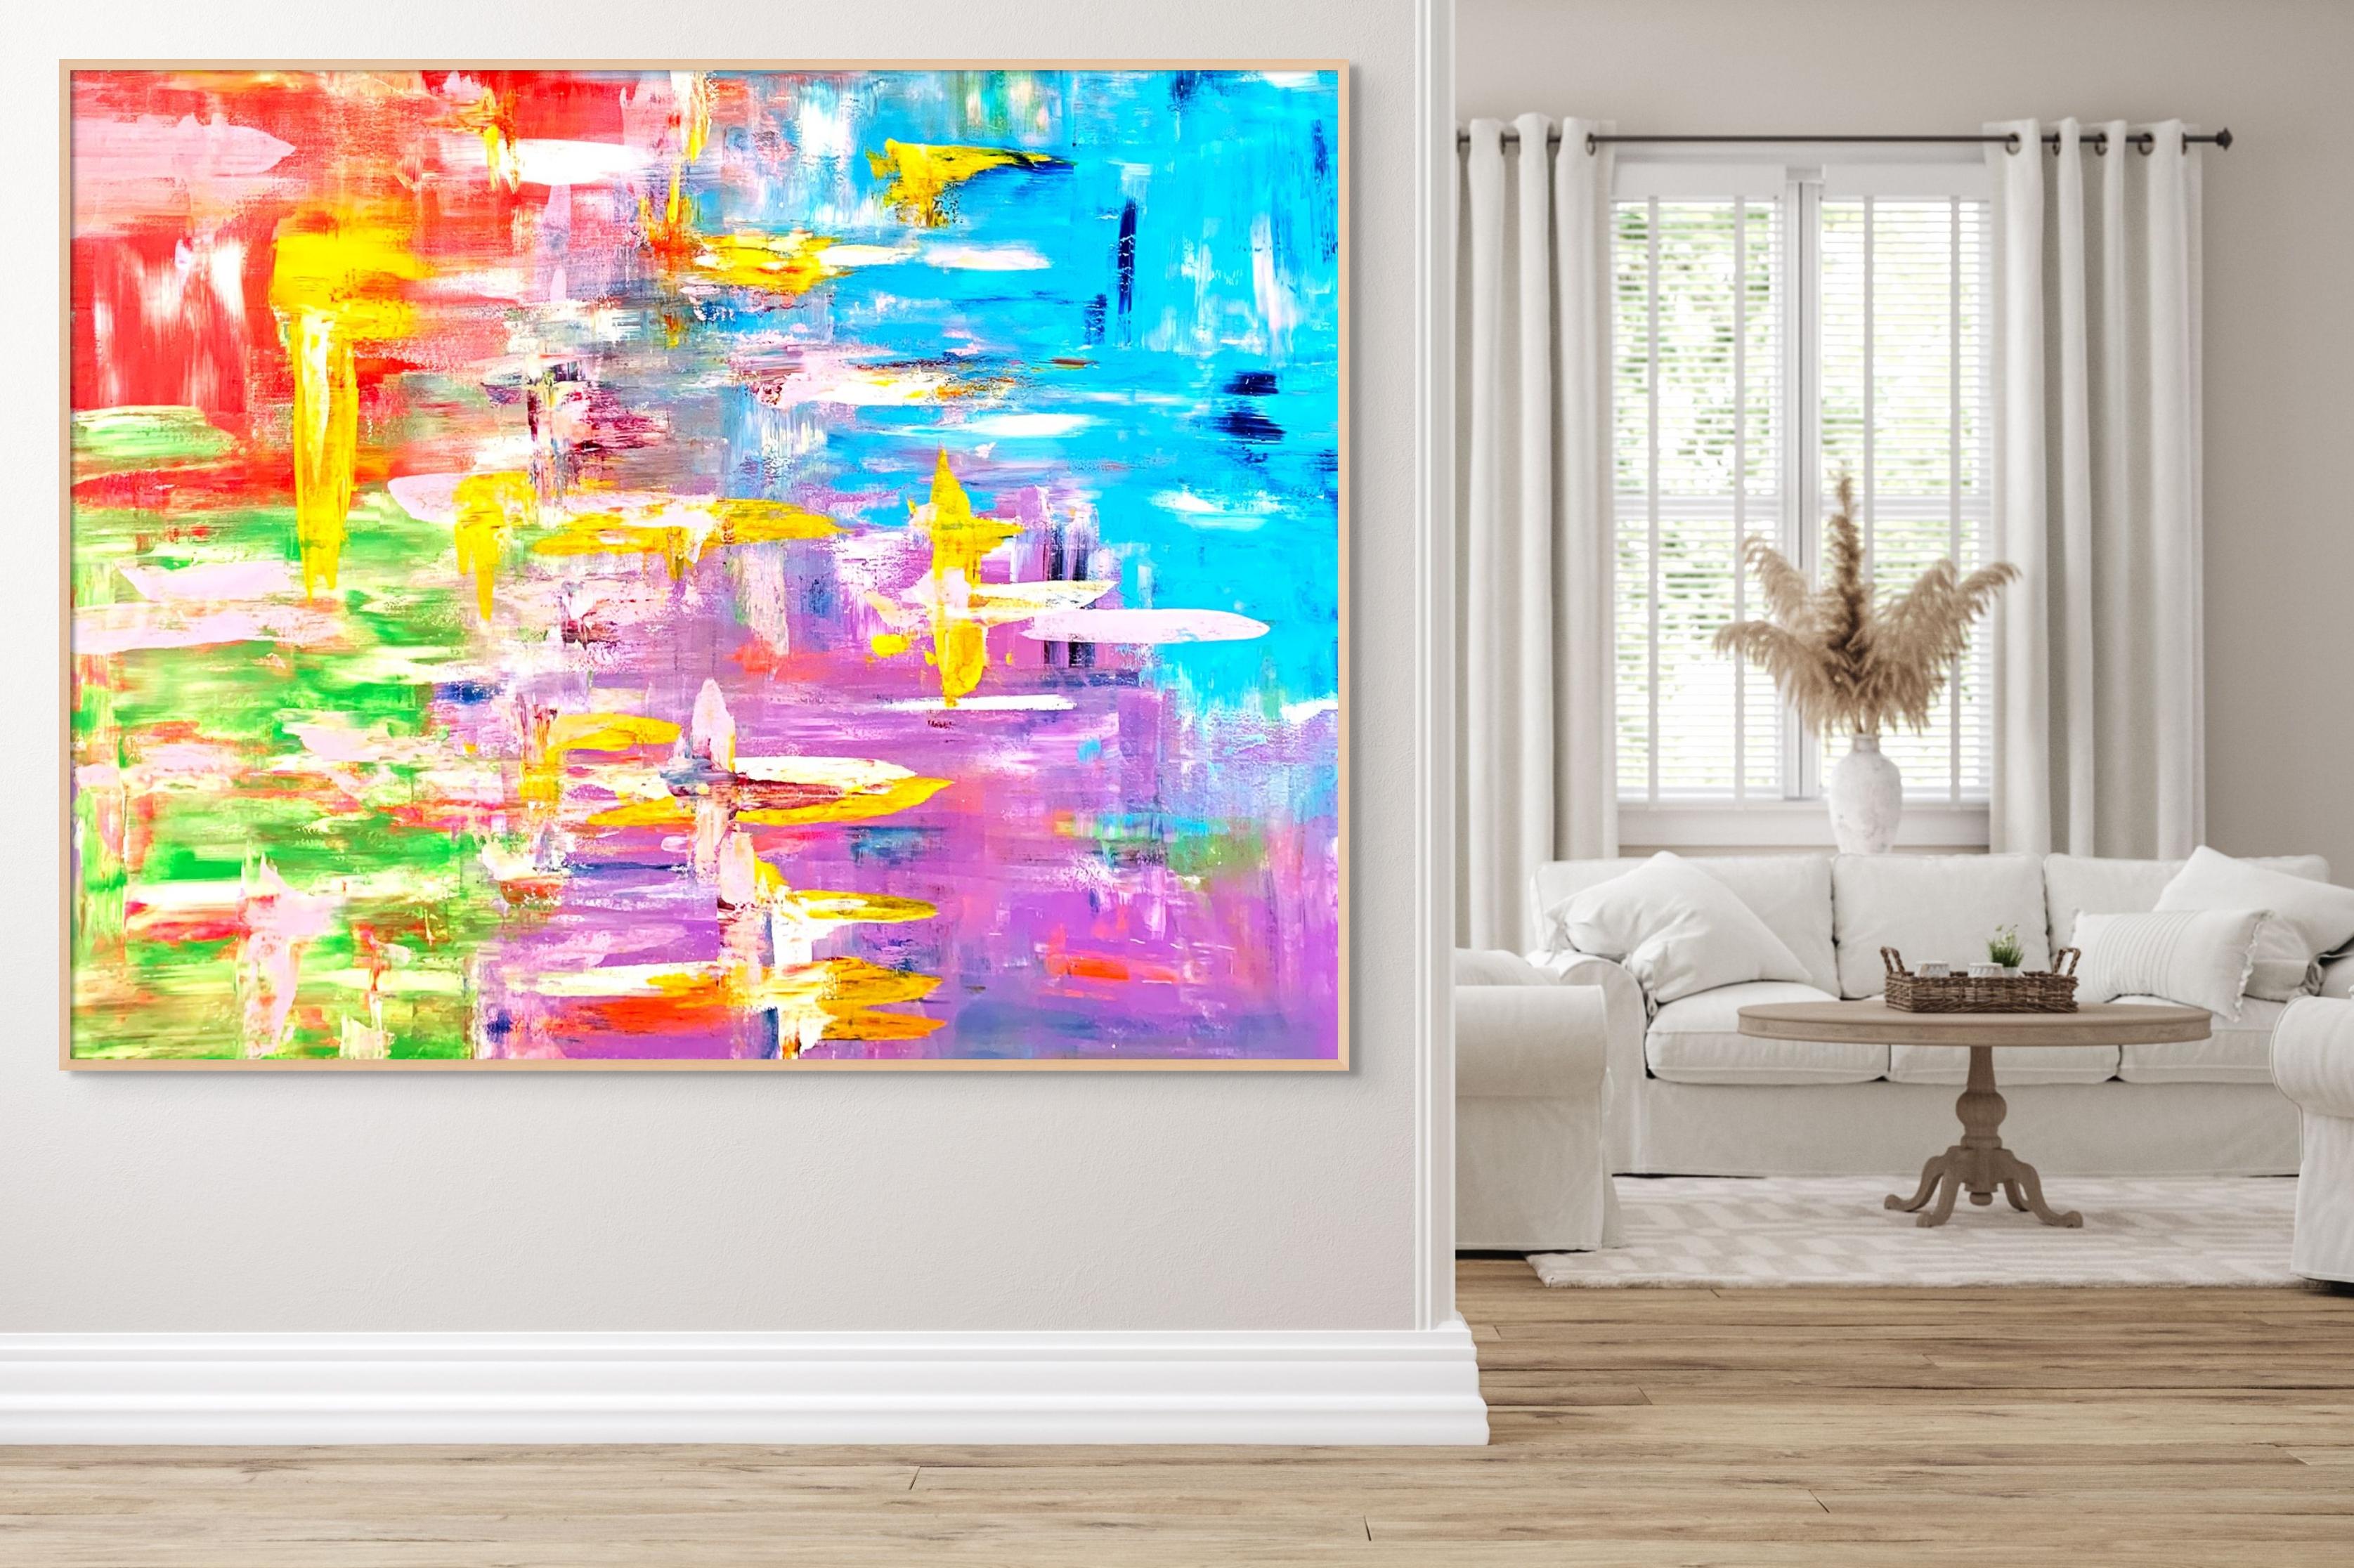 Four Colour Expectation - Abstract Expressionist Painting by Estelle Asmodelle